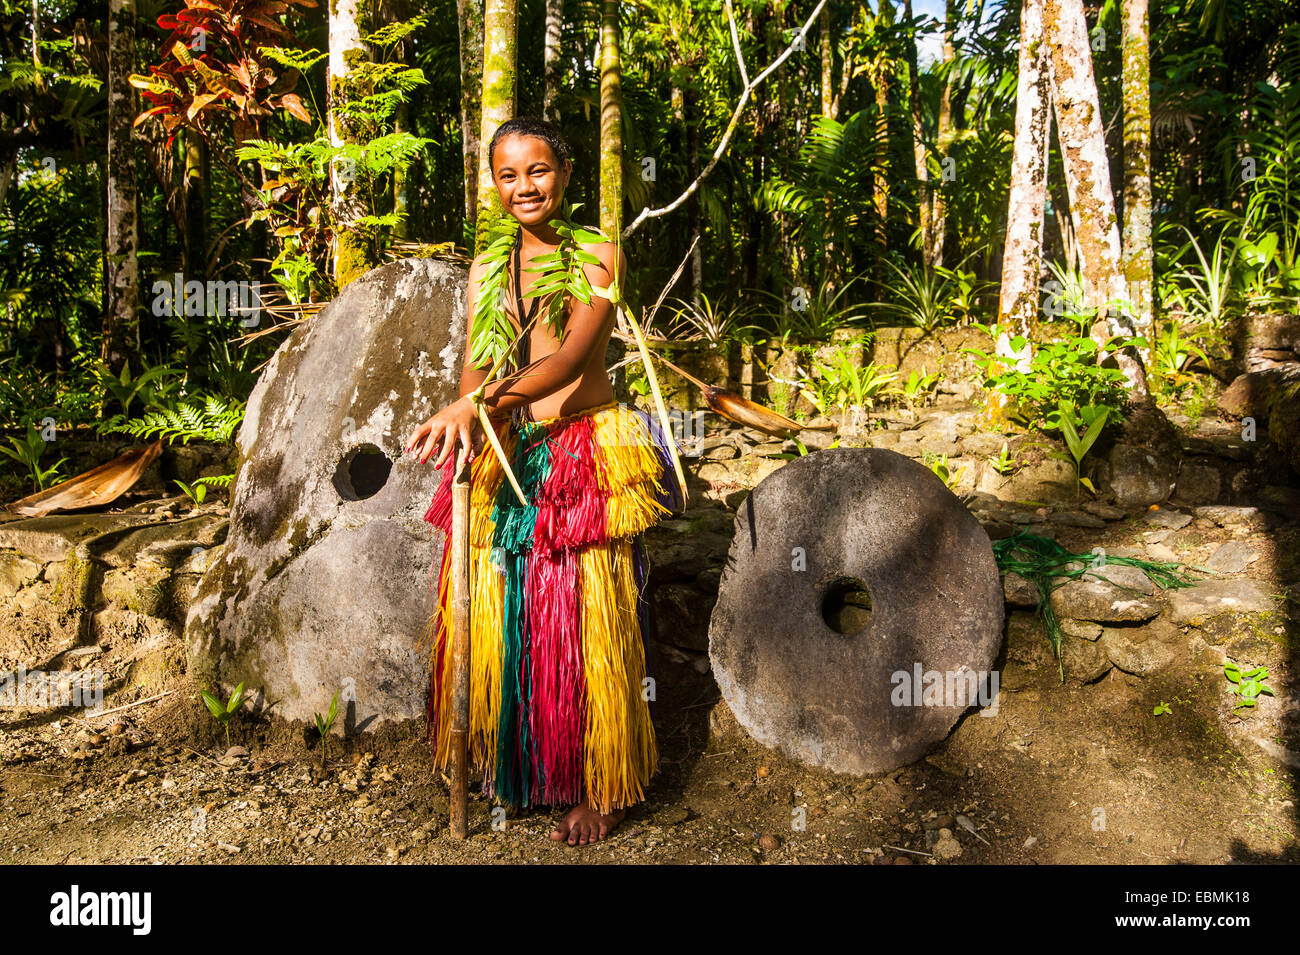 Traditionally dressed girl standing in front of stone money, Yap Island, Caroline Islands, Micronesia Stock Photo